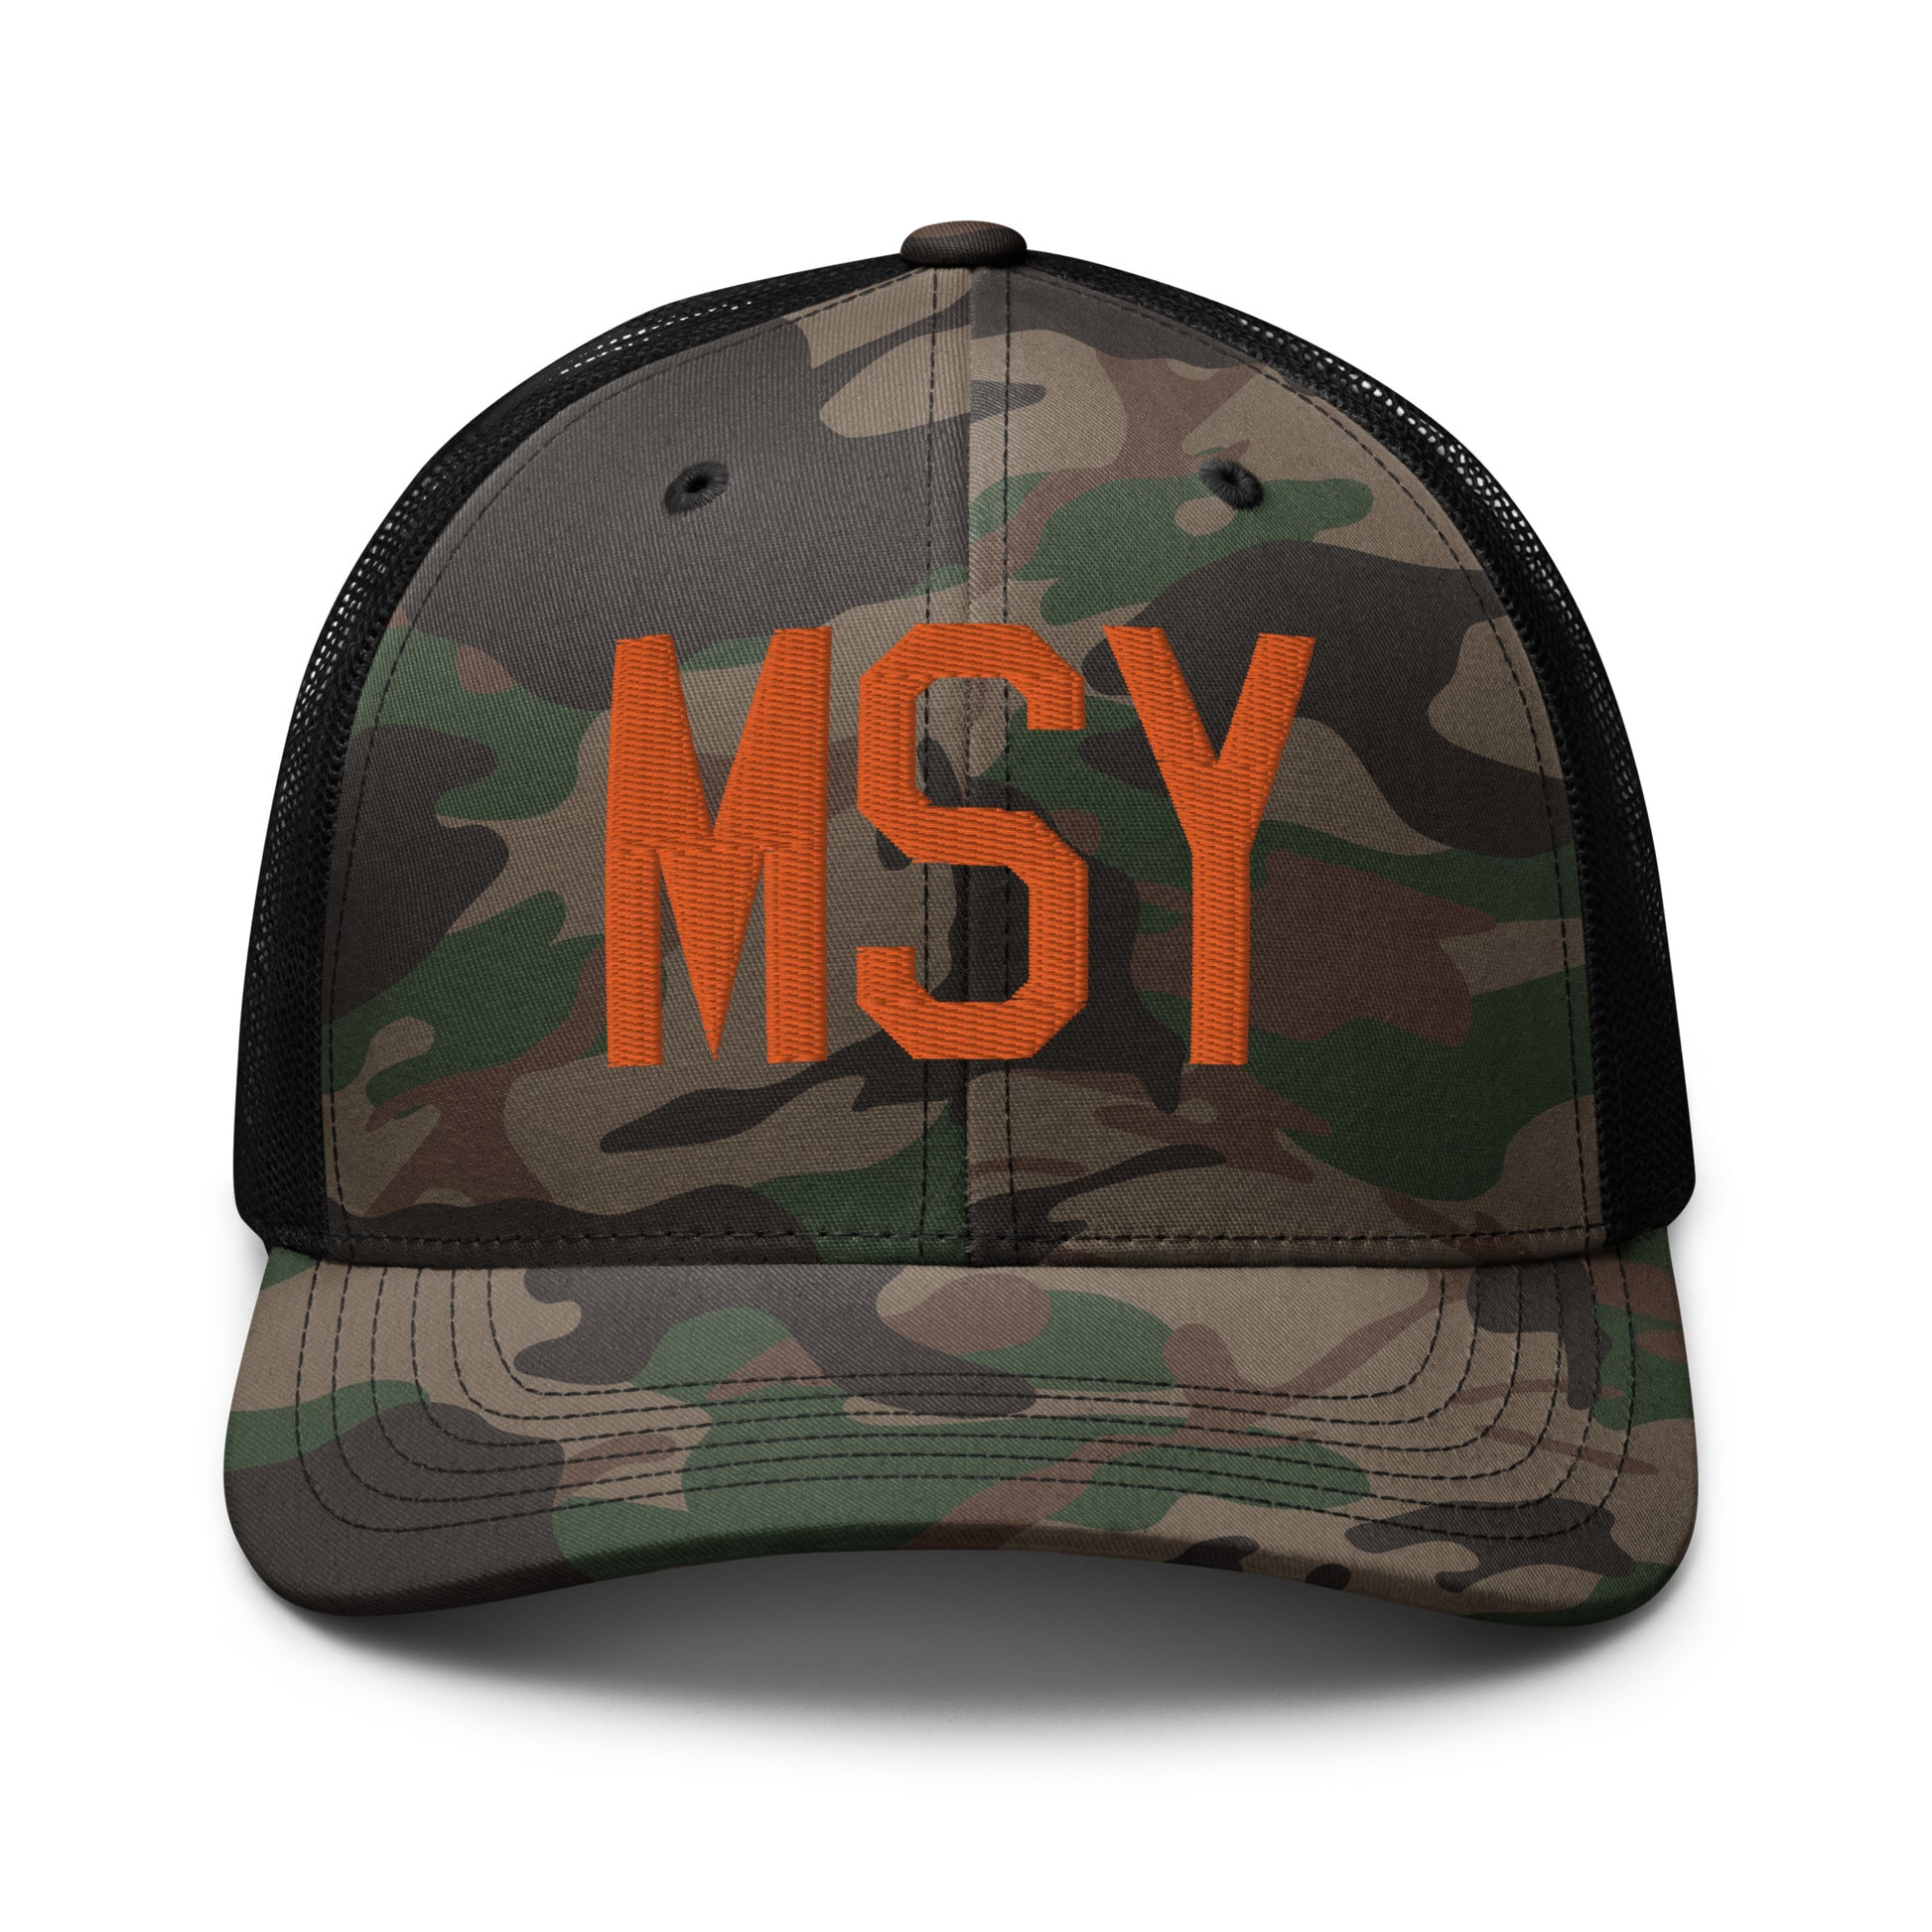 Airport Code Camouflage Trucker Hat - Orange • MSY New Orleans • YHM Designs - Image 10